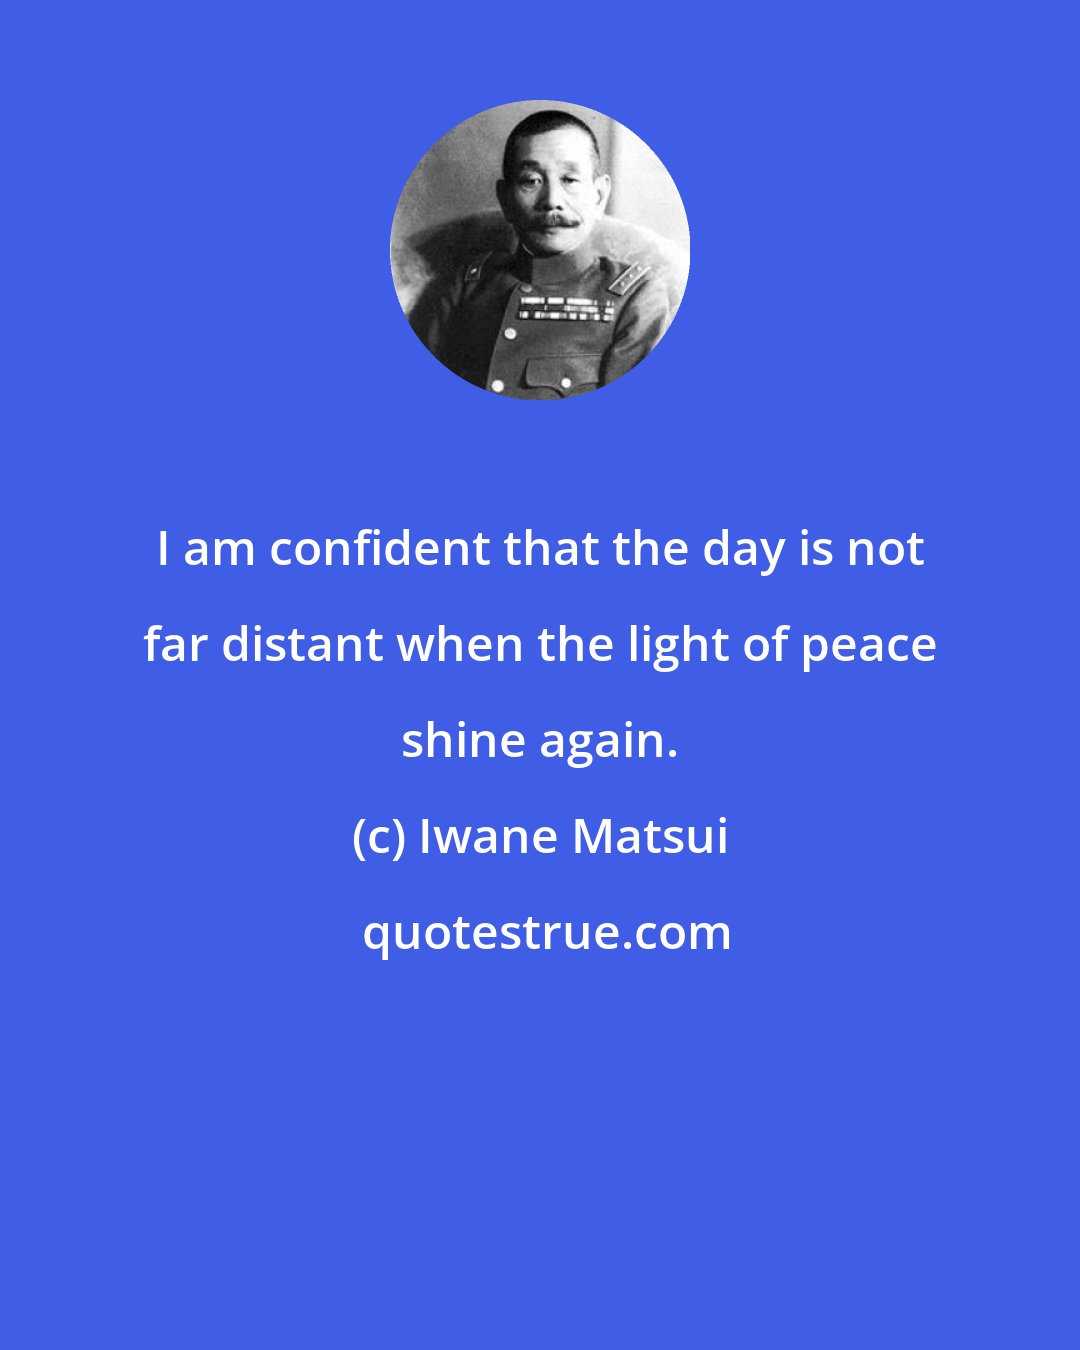 Iwane Matsui: I am confident that the day is not far distant when the light of peace shine again.